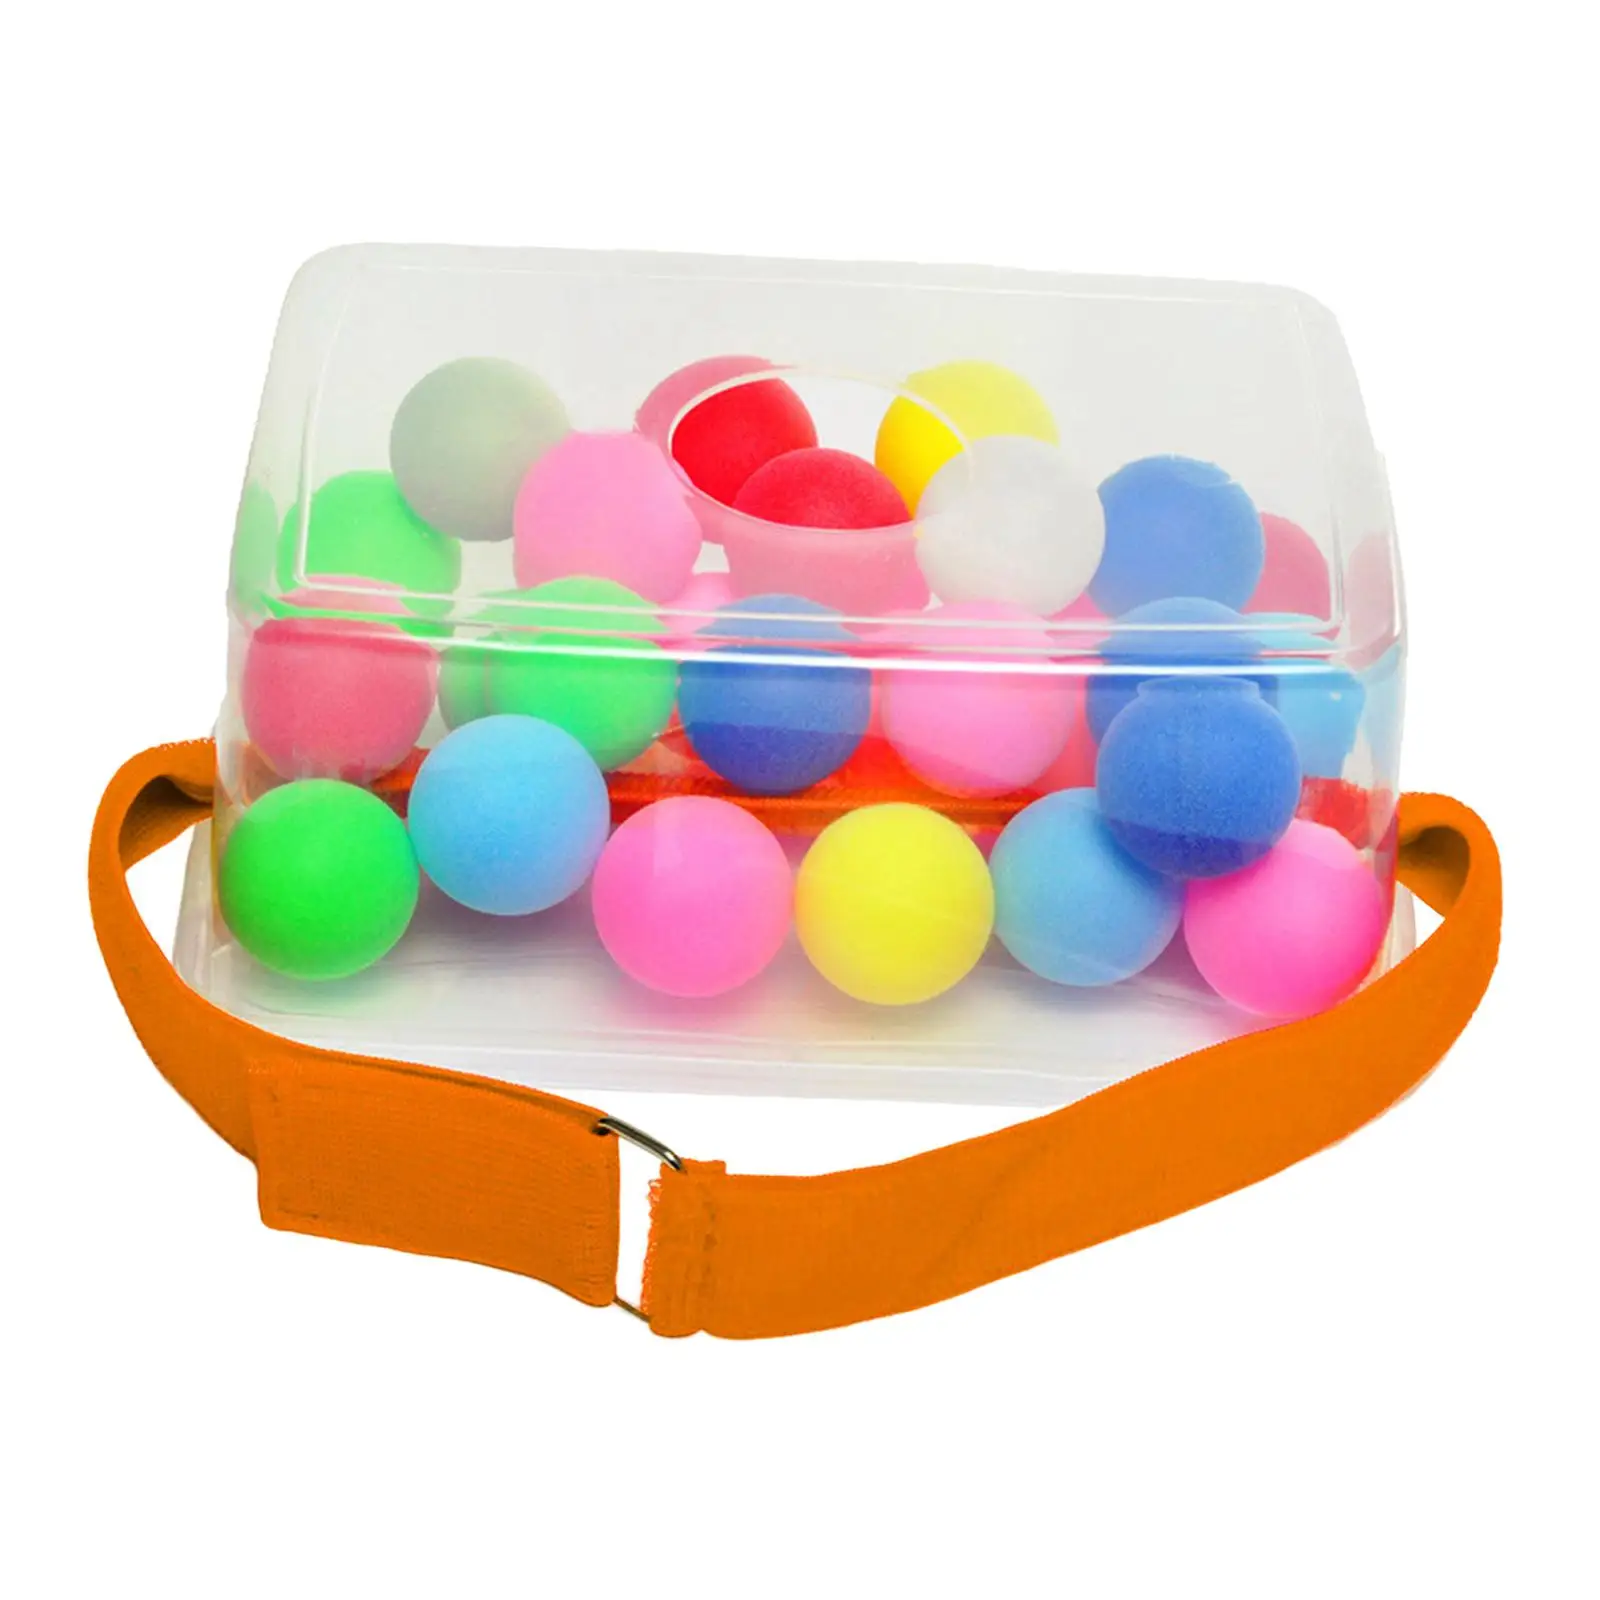 Shaking Swing Balls Game Shaking Table Tennis Indoor Outdoor Backyard Game Toy for Yard Easter Beach Camping Boys Girls